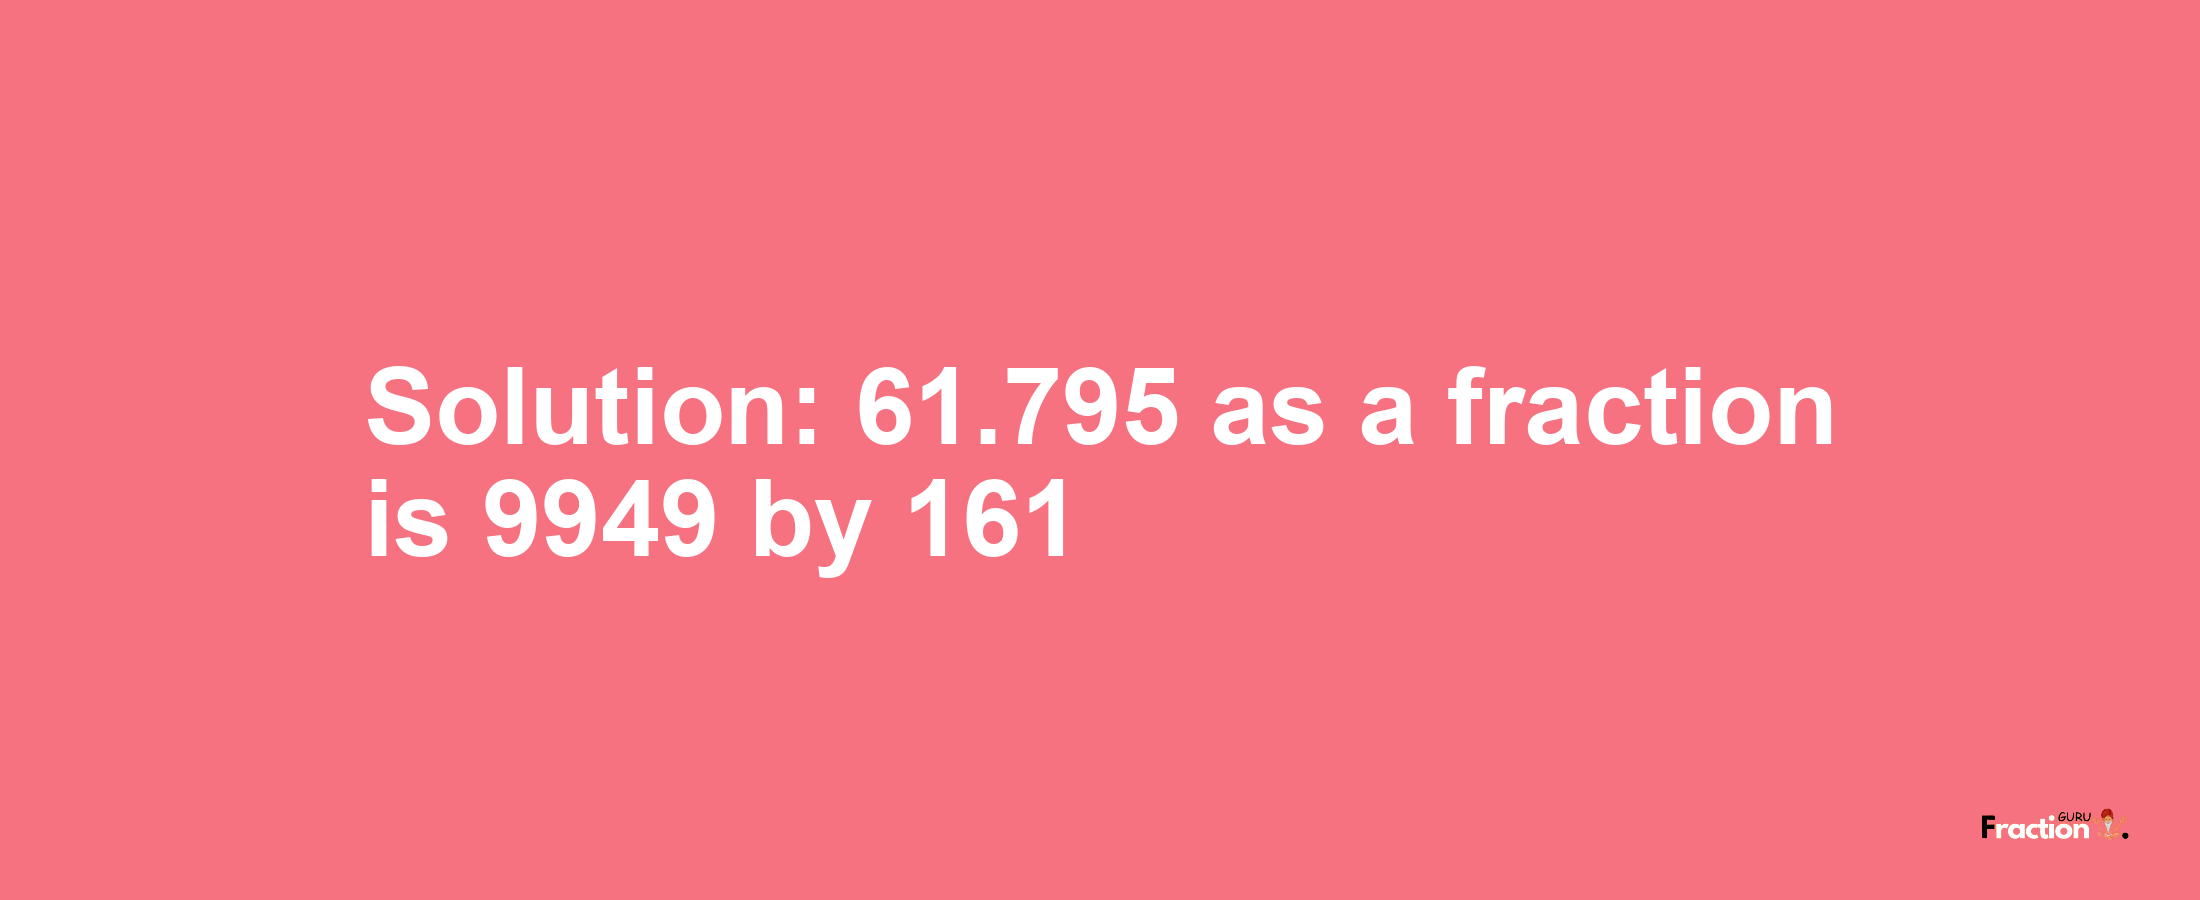 Solution:61.795 as a fraction is 9949/161